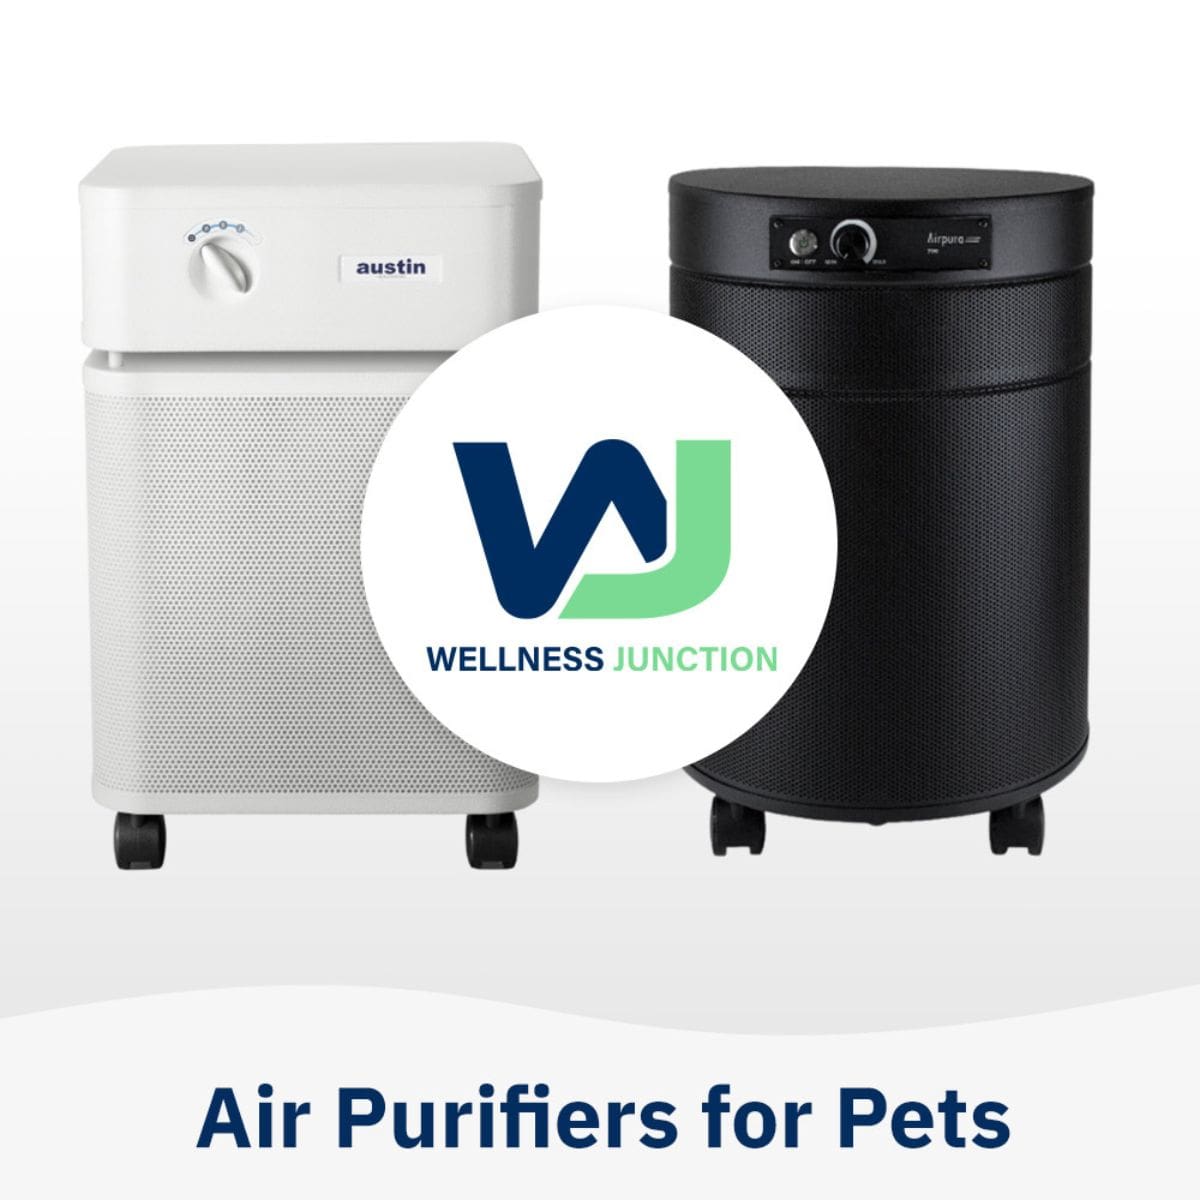 Air Purifiers for Pets